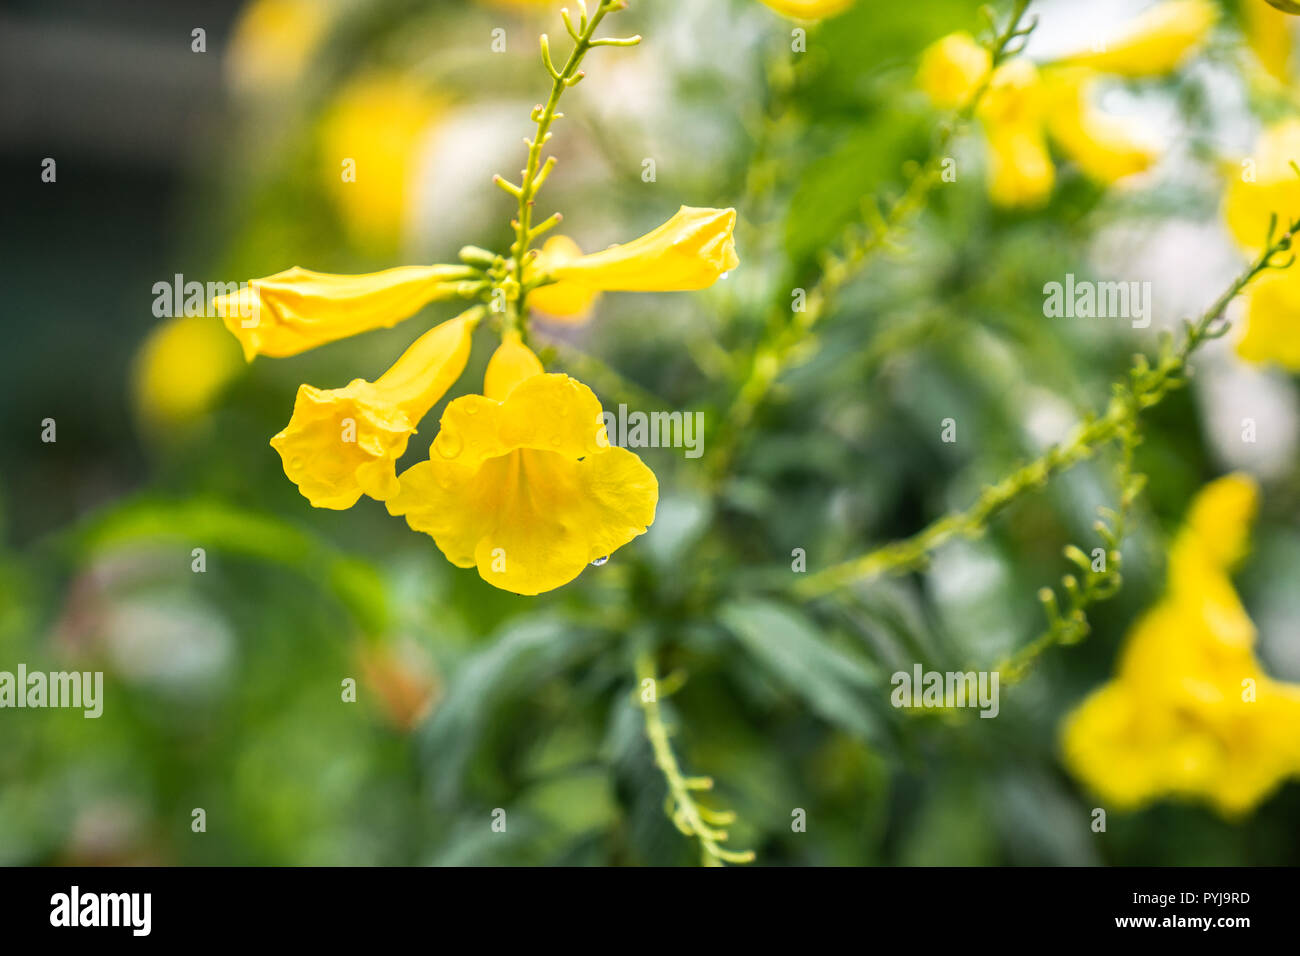 close up yellow trumpet-flower petal or  Tecoma stans on blurred green leaf Stock Photo